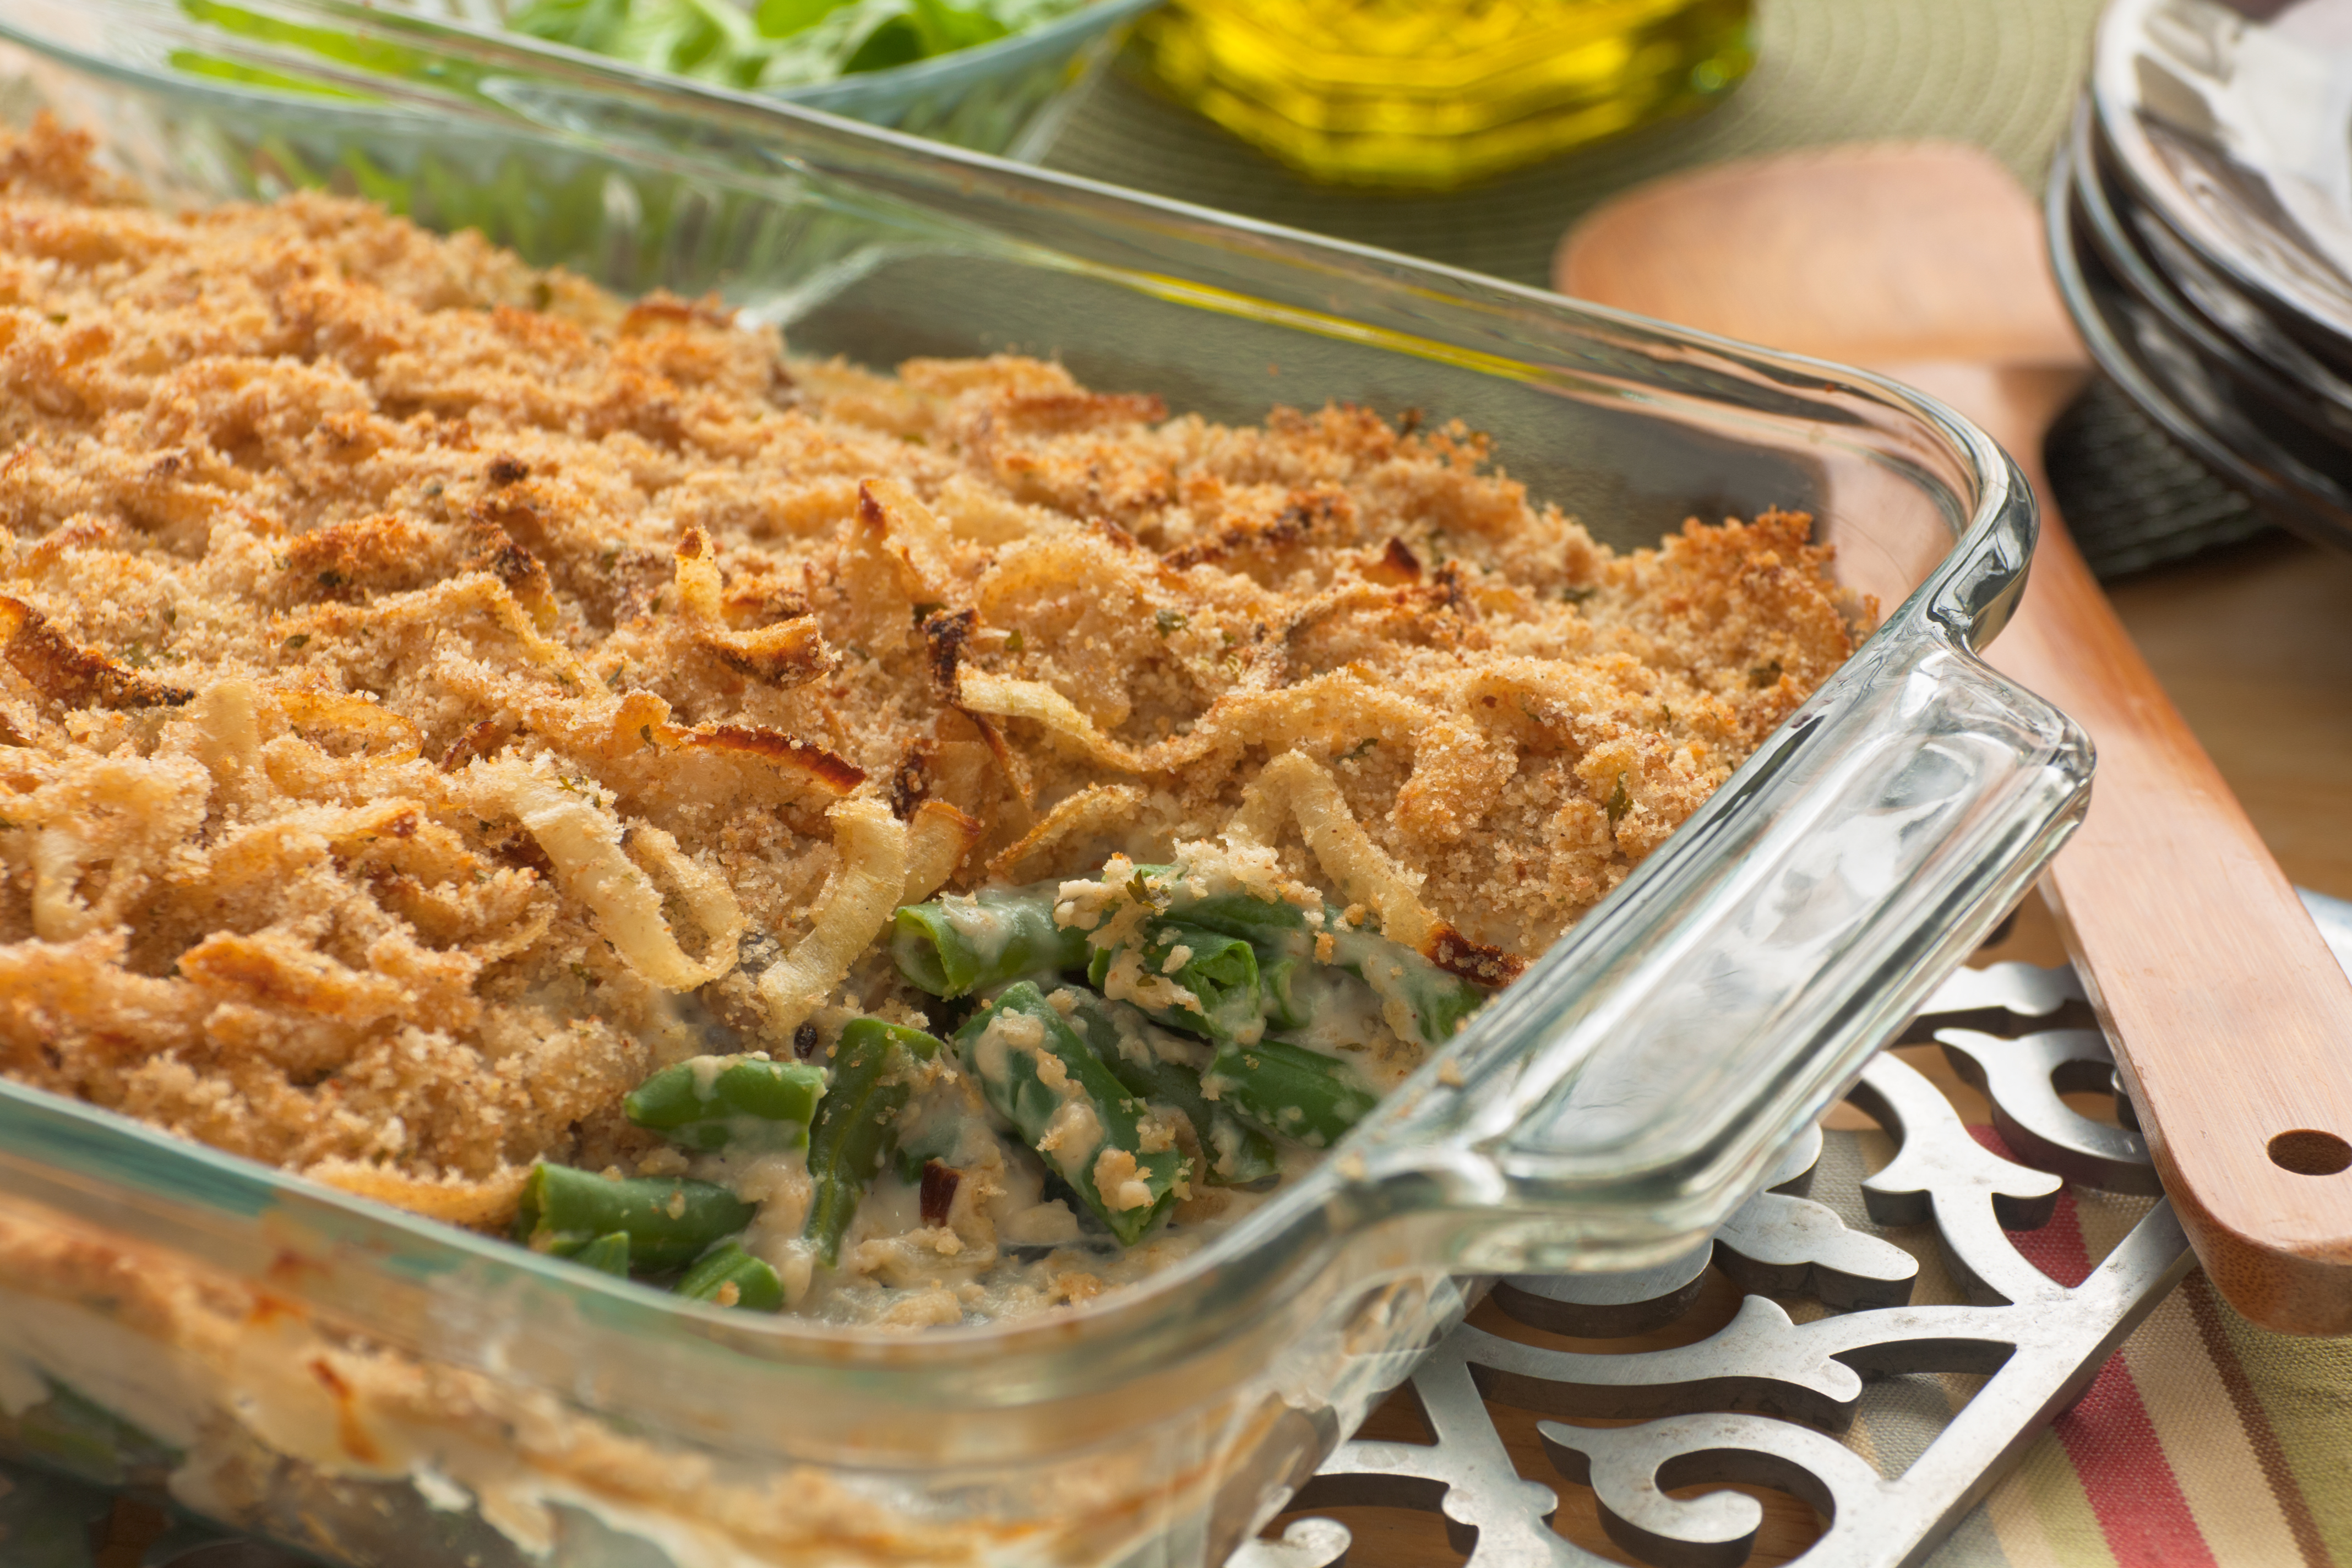 Green Bean Casserole with Caramelized Onions – Guiding Stars